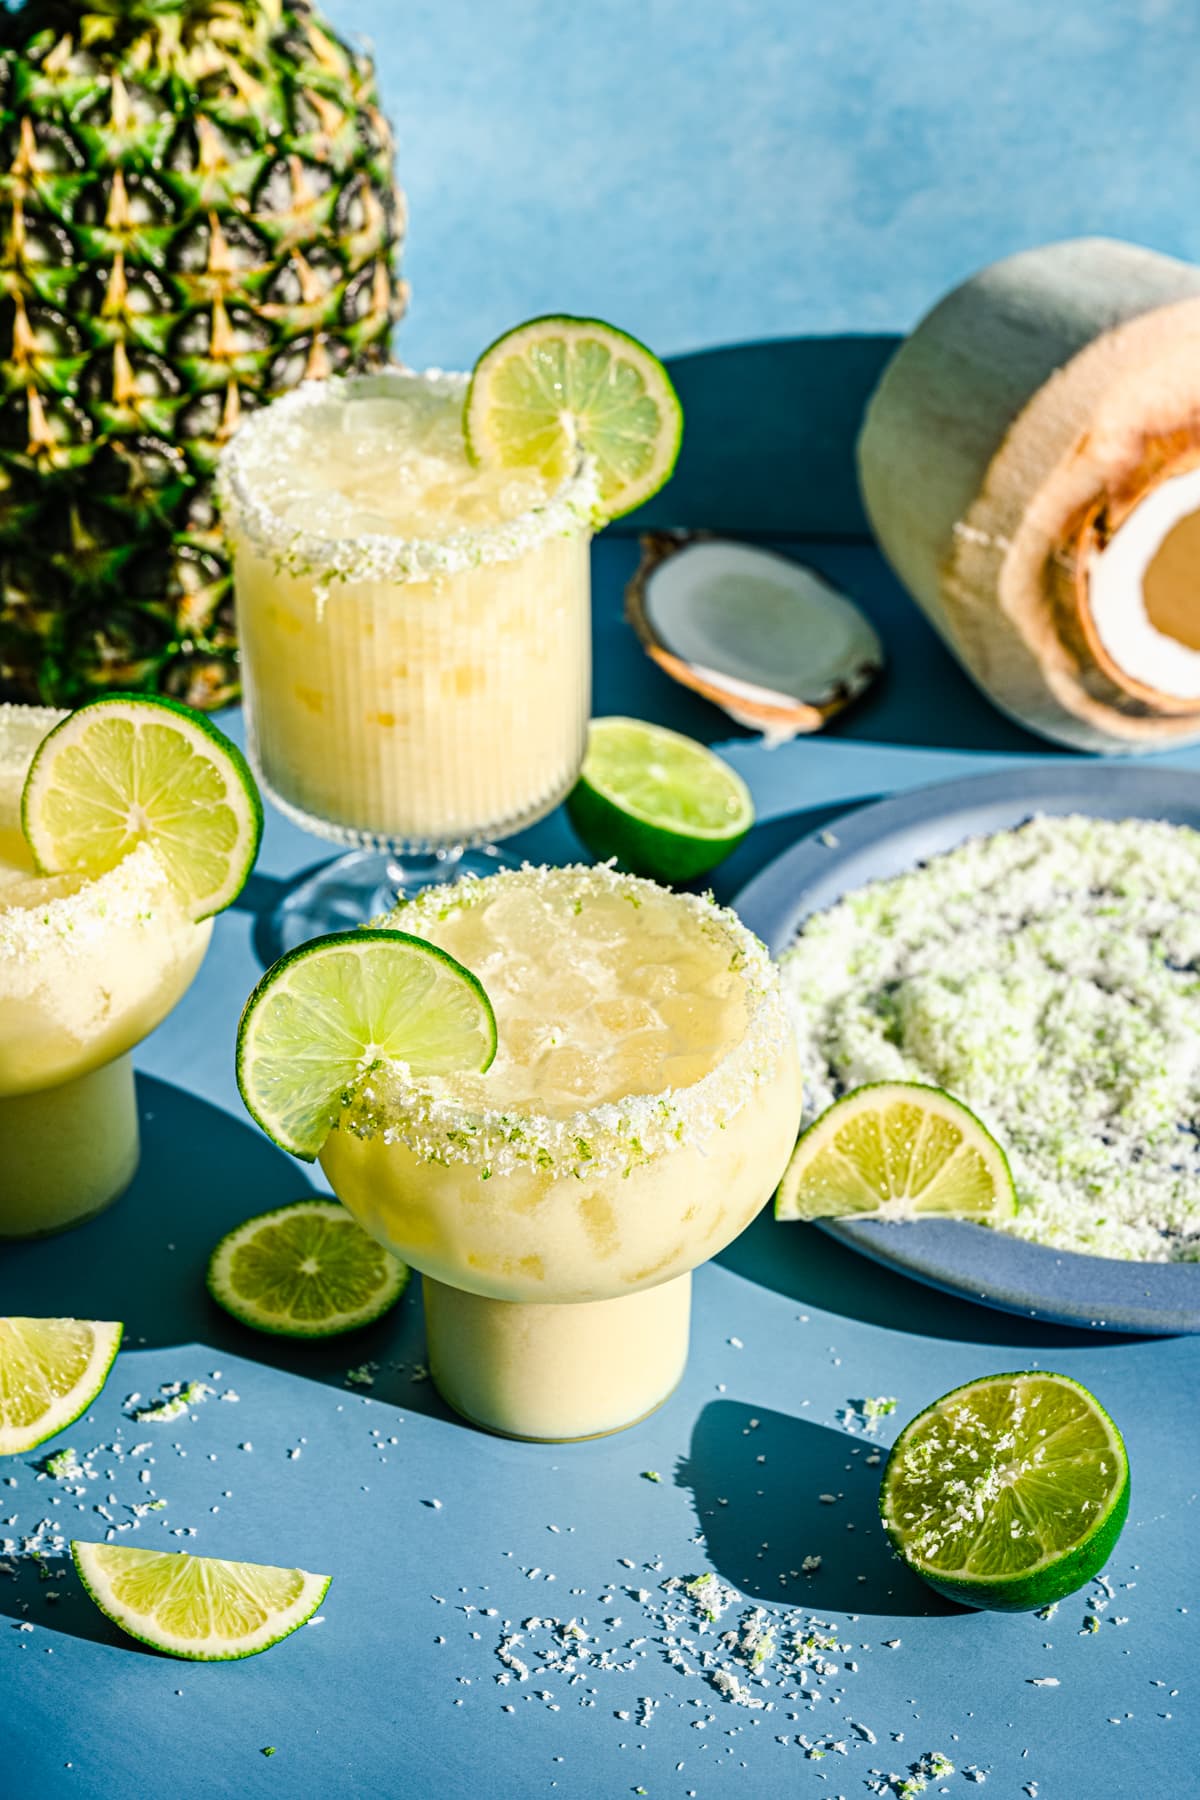 Slightly overhead of the finished pineapple coconut margaritas with limes, coconut, and pineapple surrounding them.